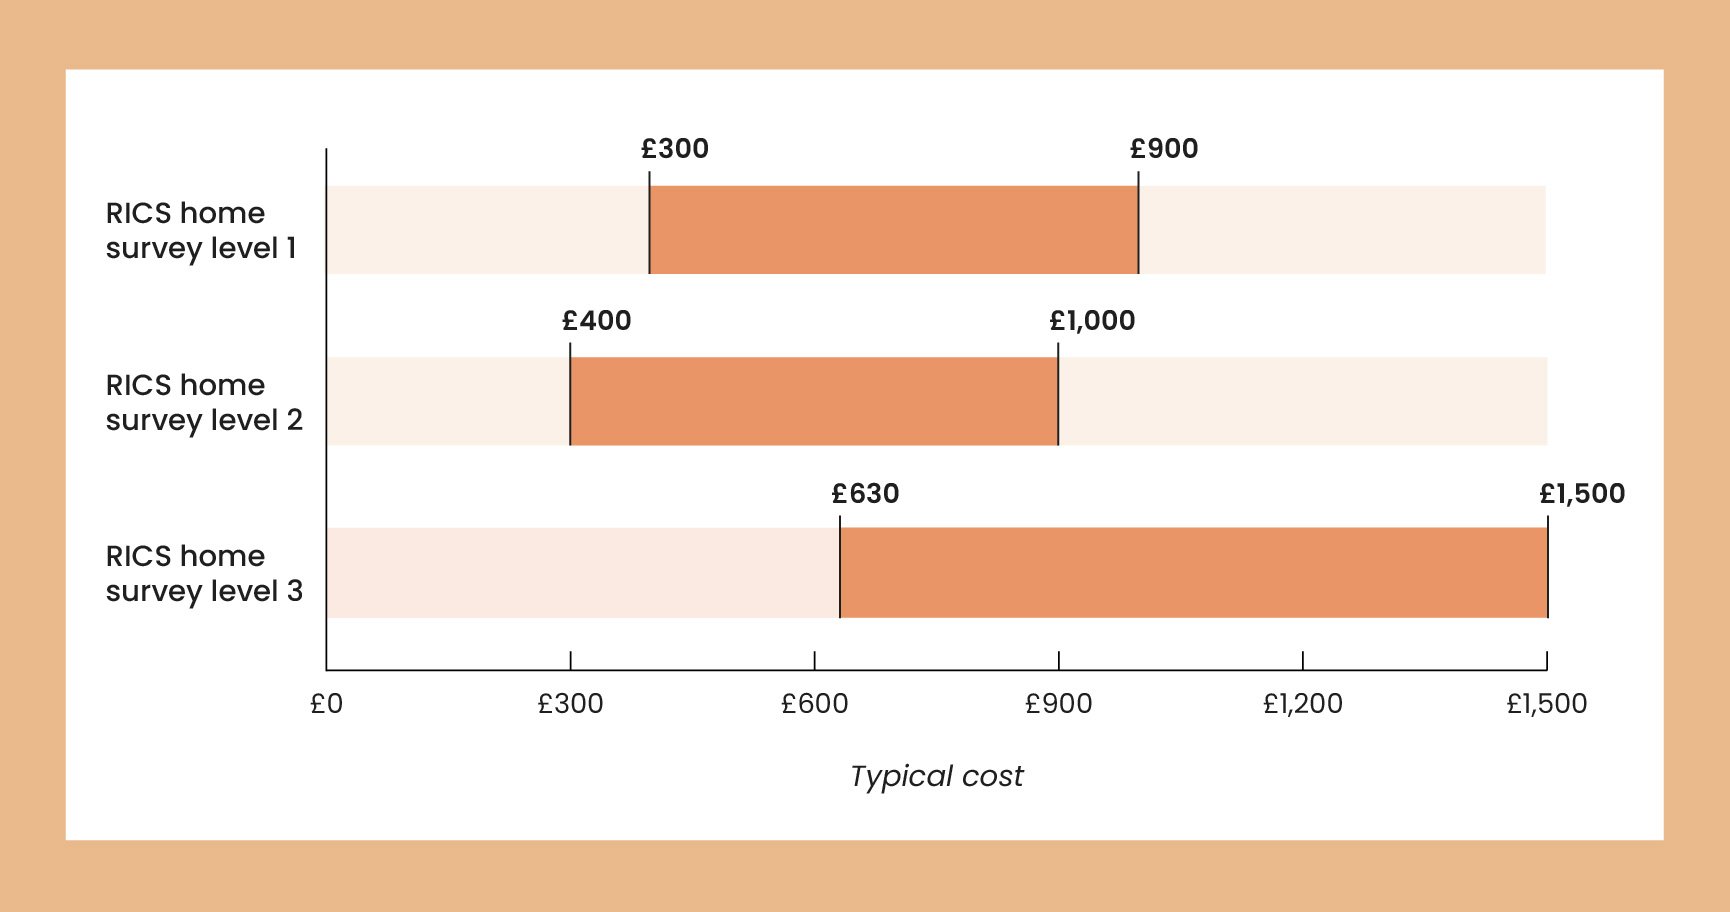 A light orange bar chart showing the typical cost of RICS home surveys by level